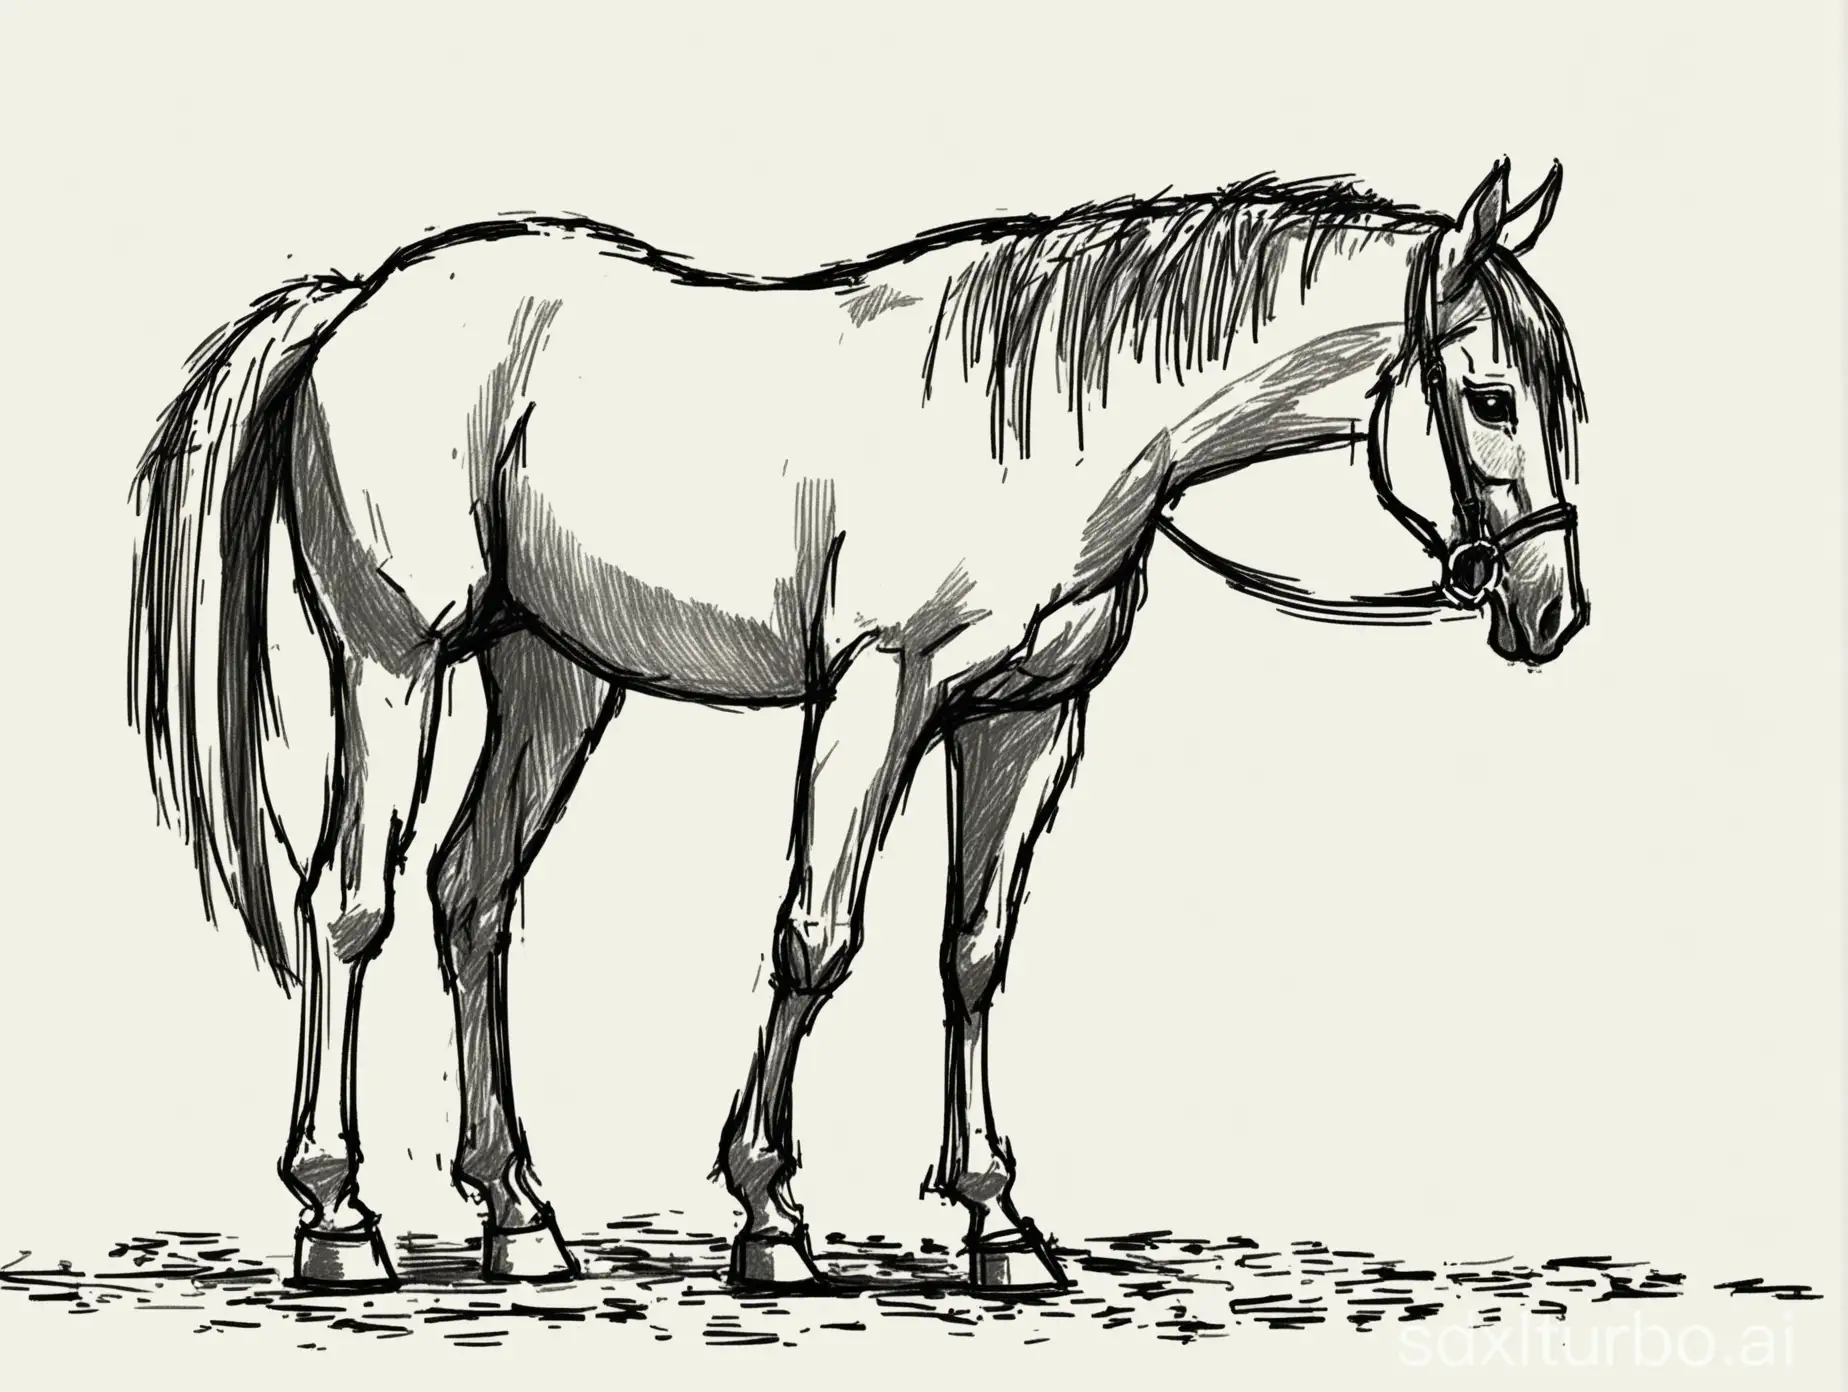 draw a horse standing on the ground with its head raised, full size, in profile. one hoof lifted. drawing style - quick sketch